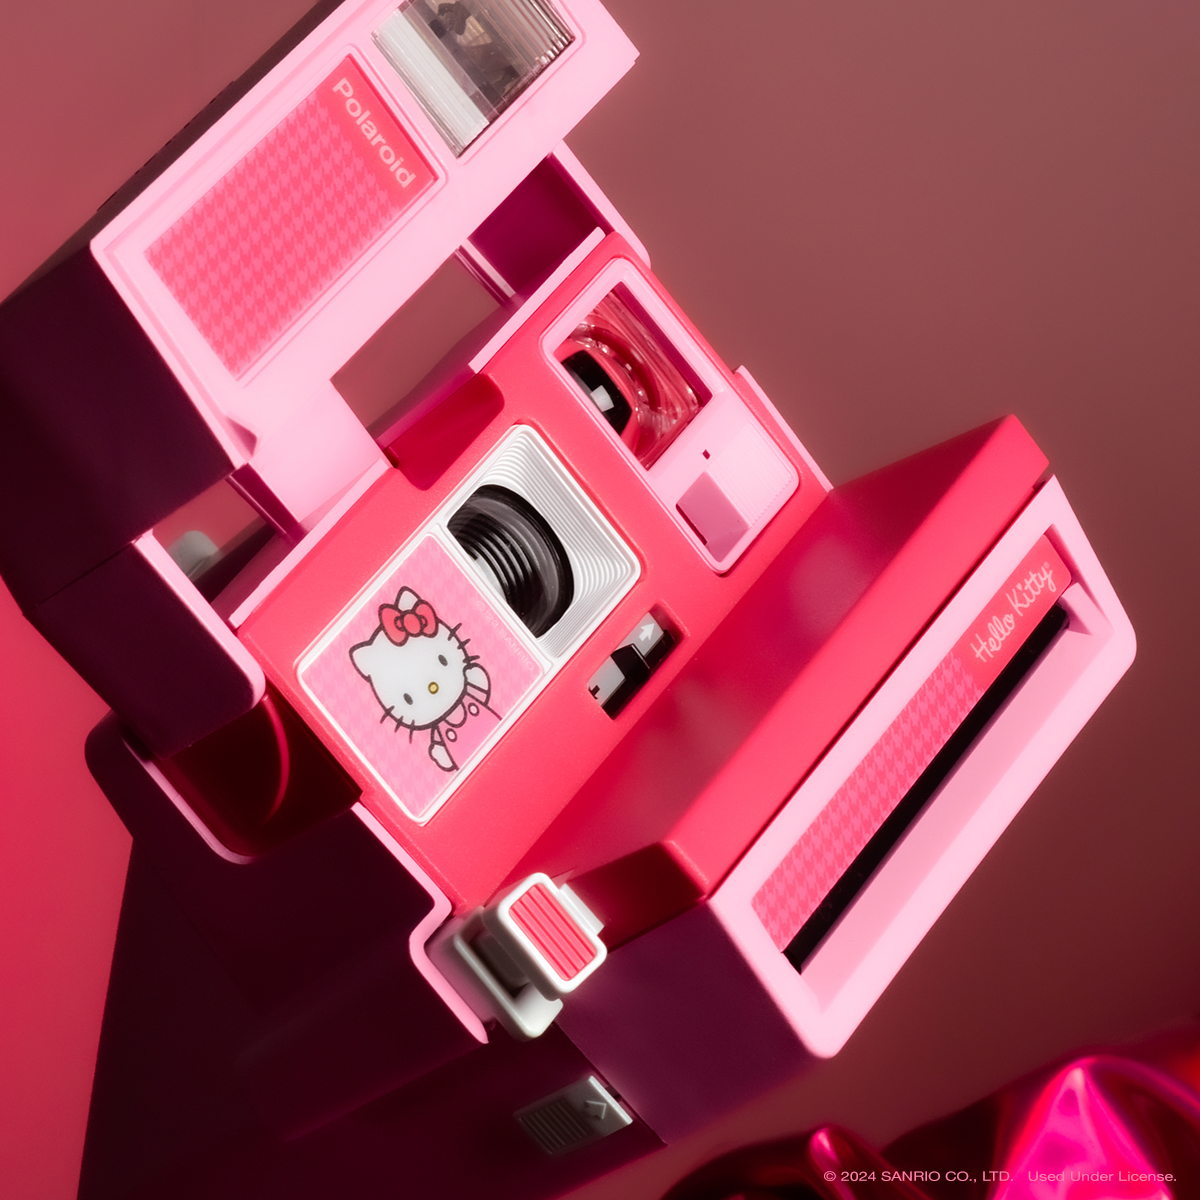 Perfectly pink 💖 Get your hands on the newest Hello Kitty Polaroid camera 📸 Shop now: bit.ly/43KgfXB